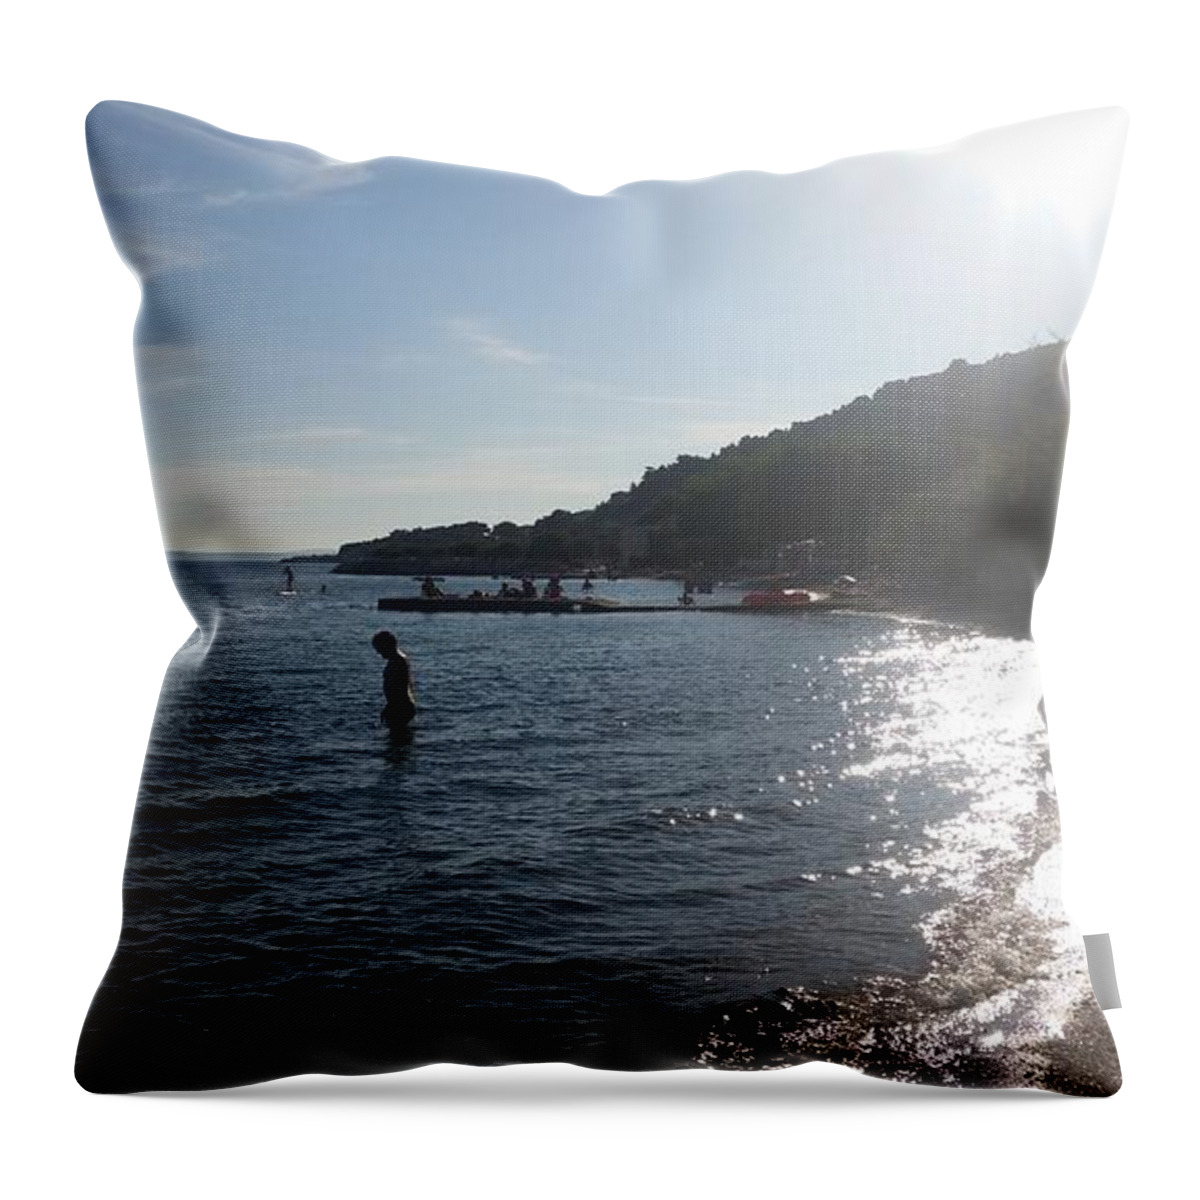 Beautiful Throw Pillow featuring the photograph Sunny Day by Kristian Dolo